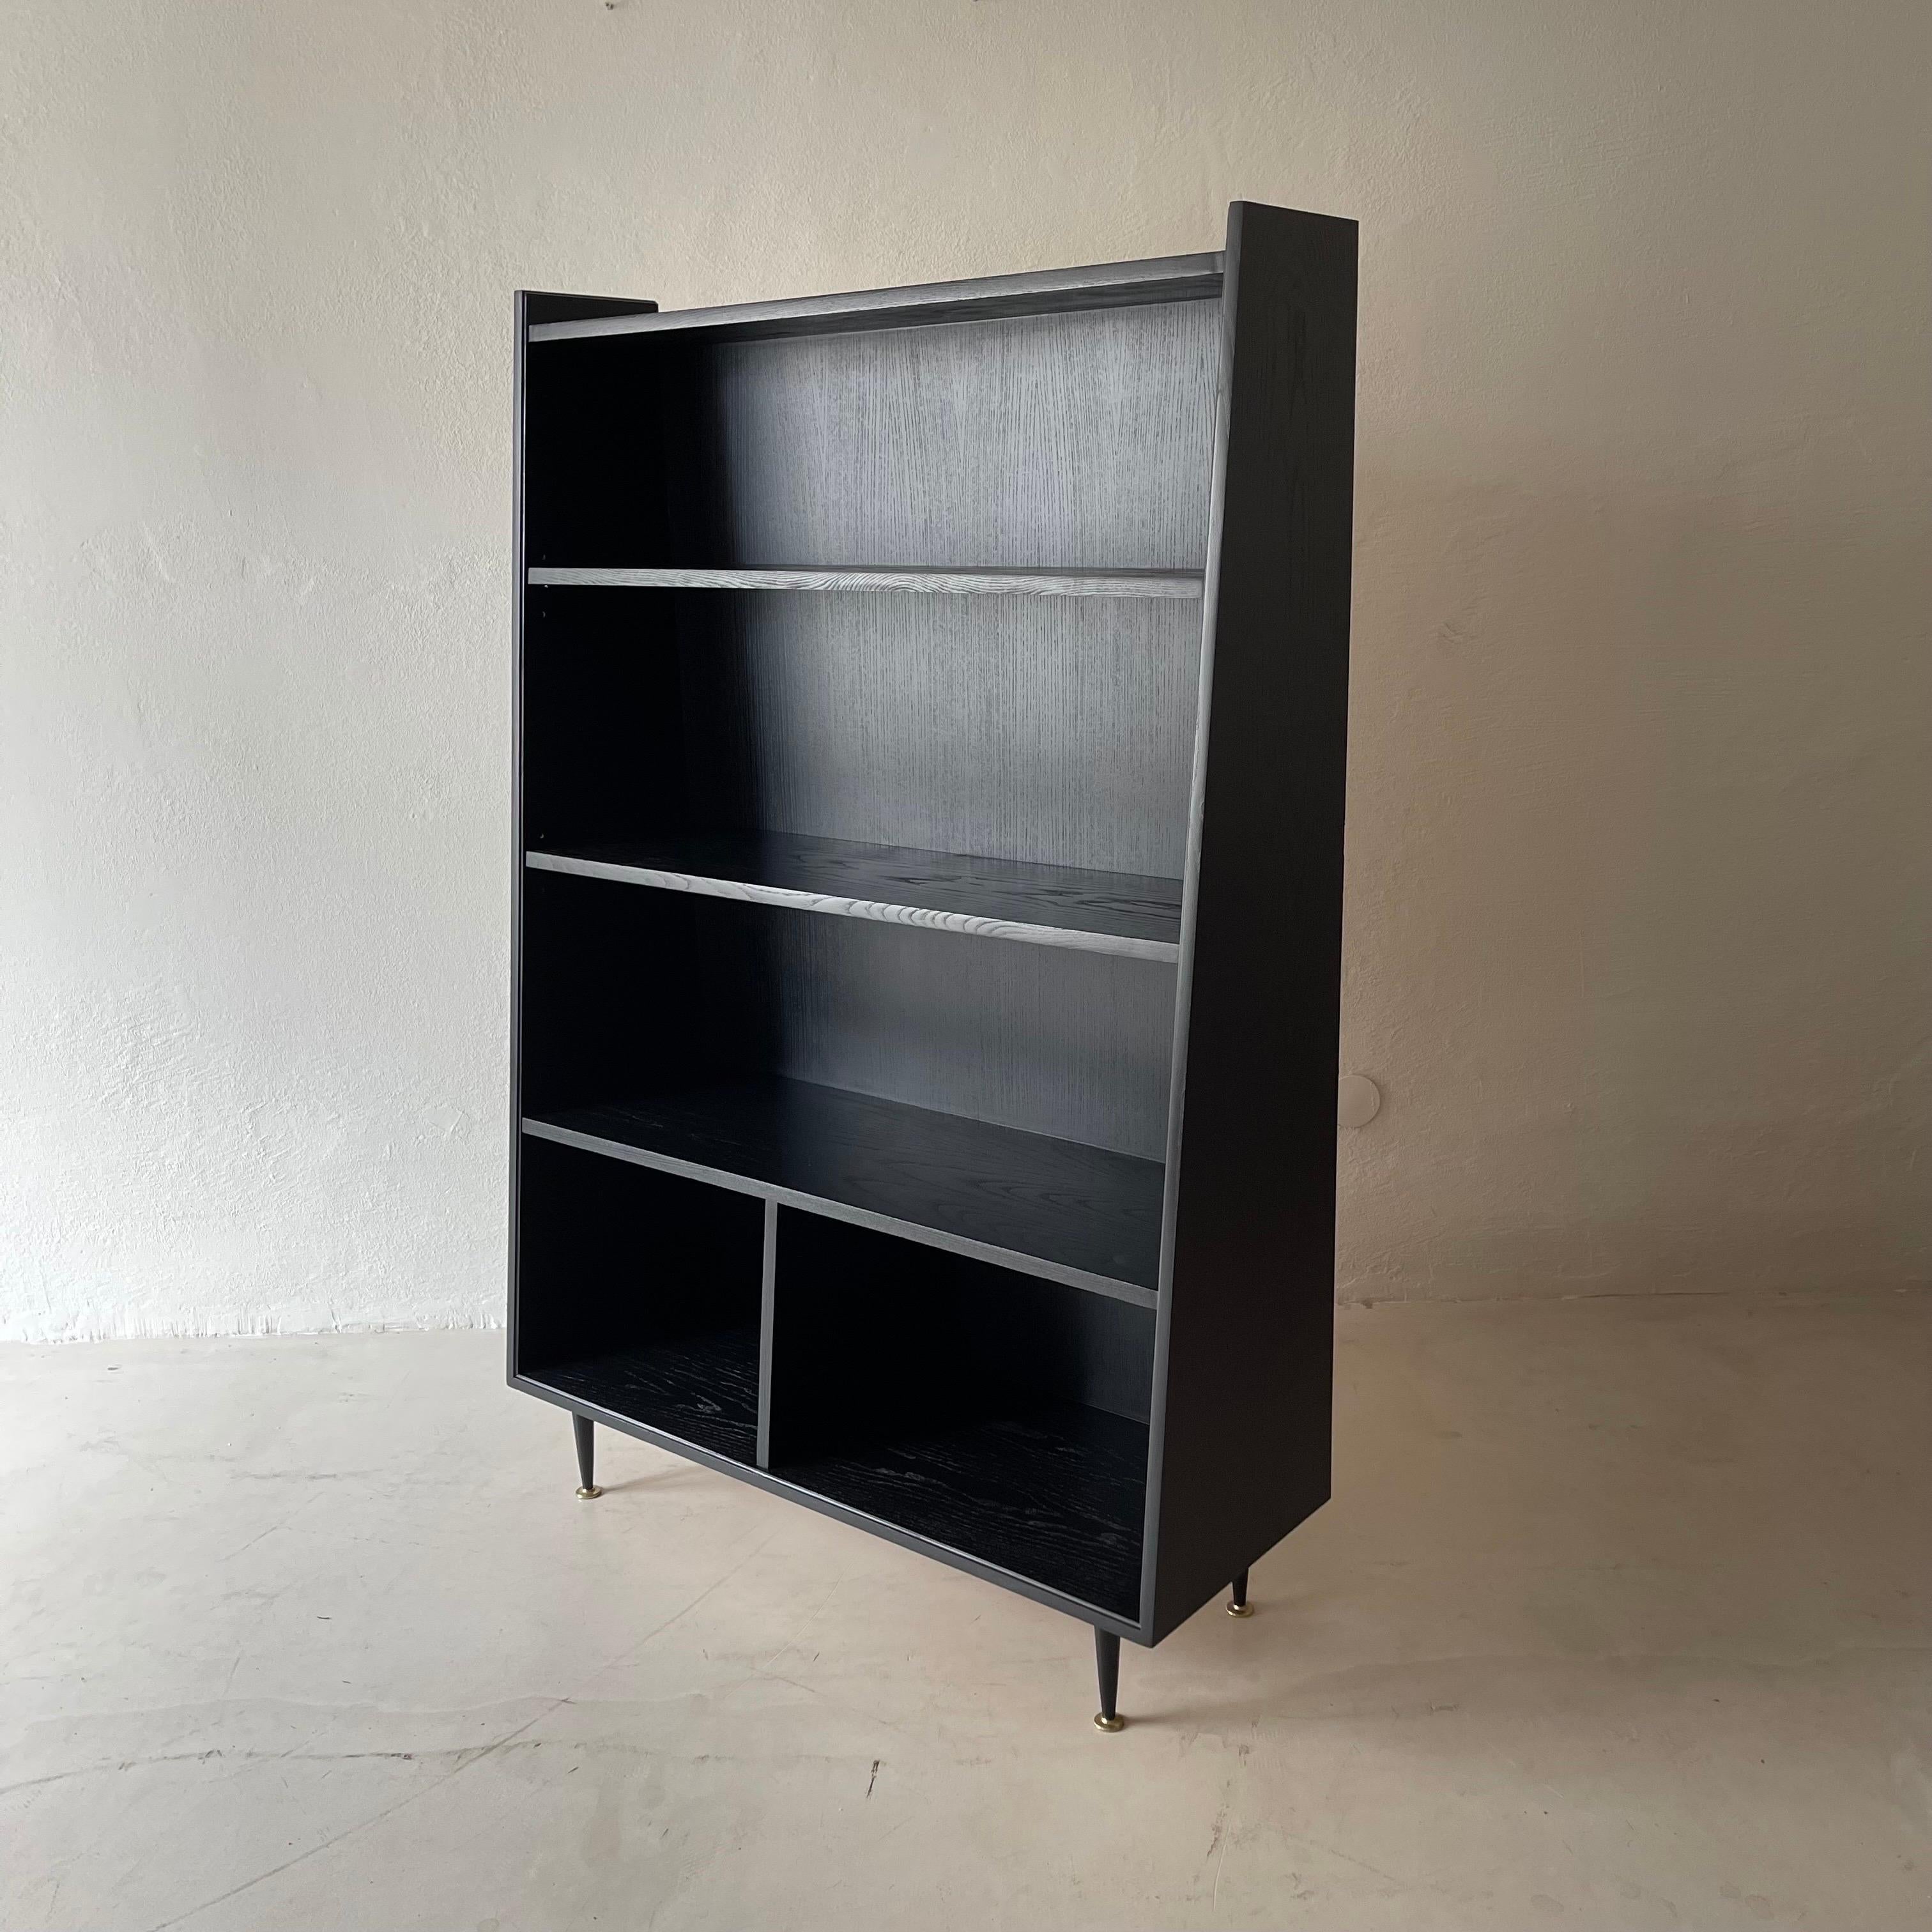 Blackened bookcase shelves 1950s, standing on black metal feet with gold colored details.